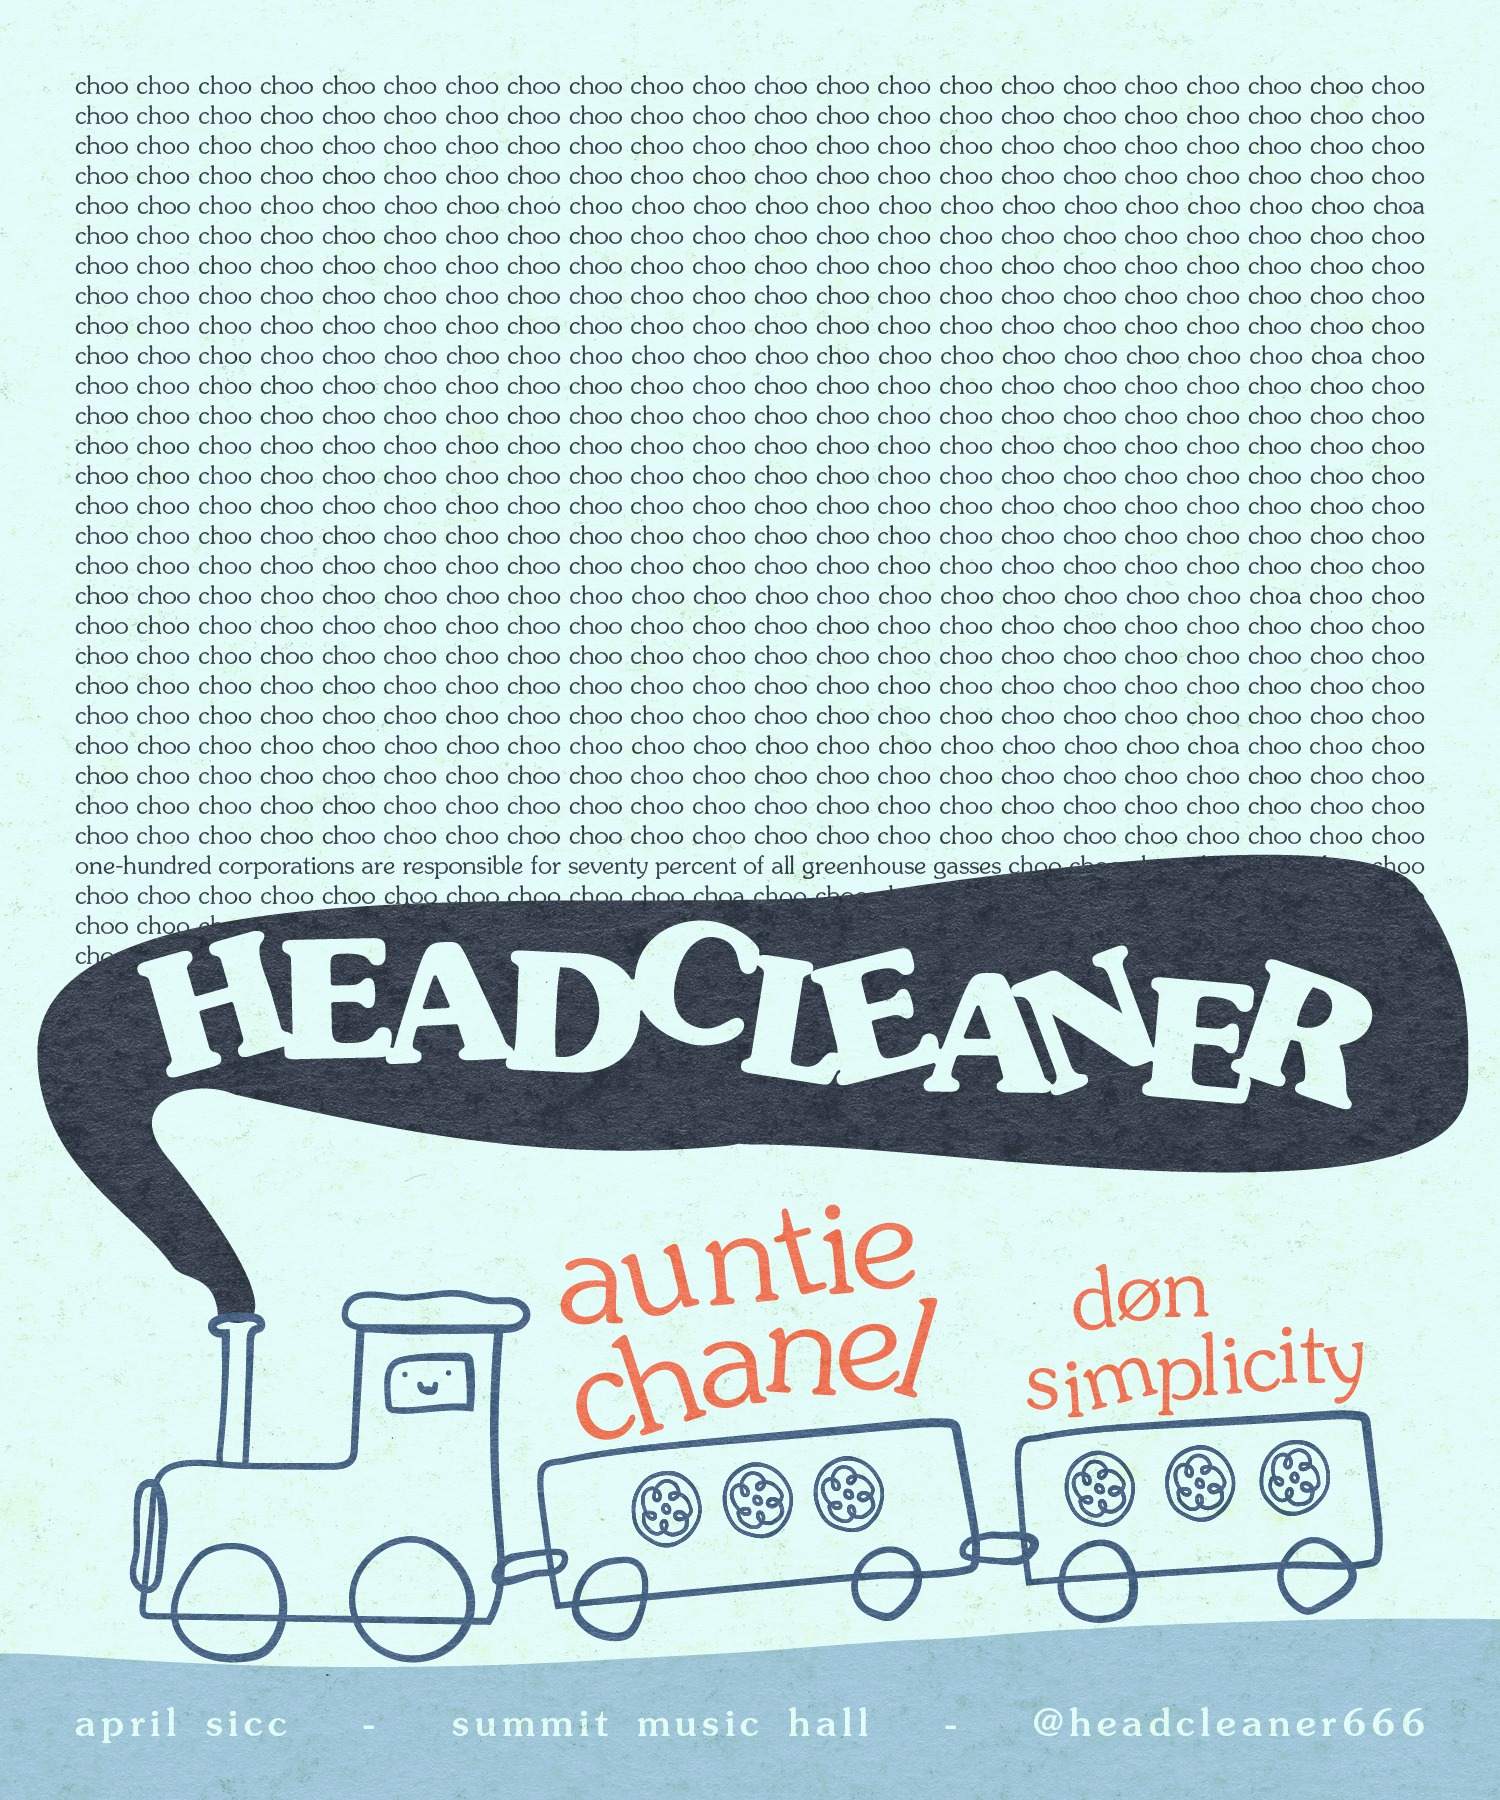 Headcleaner | Auntie Chanel - Página frontal